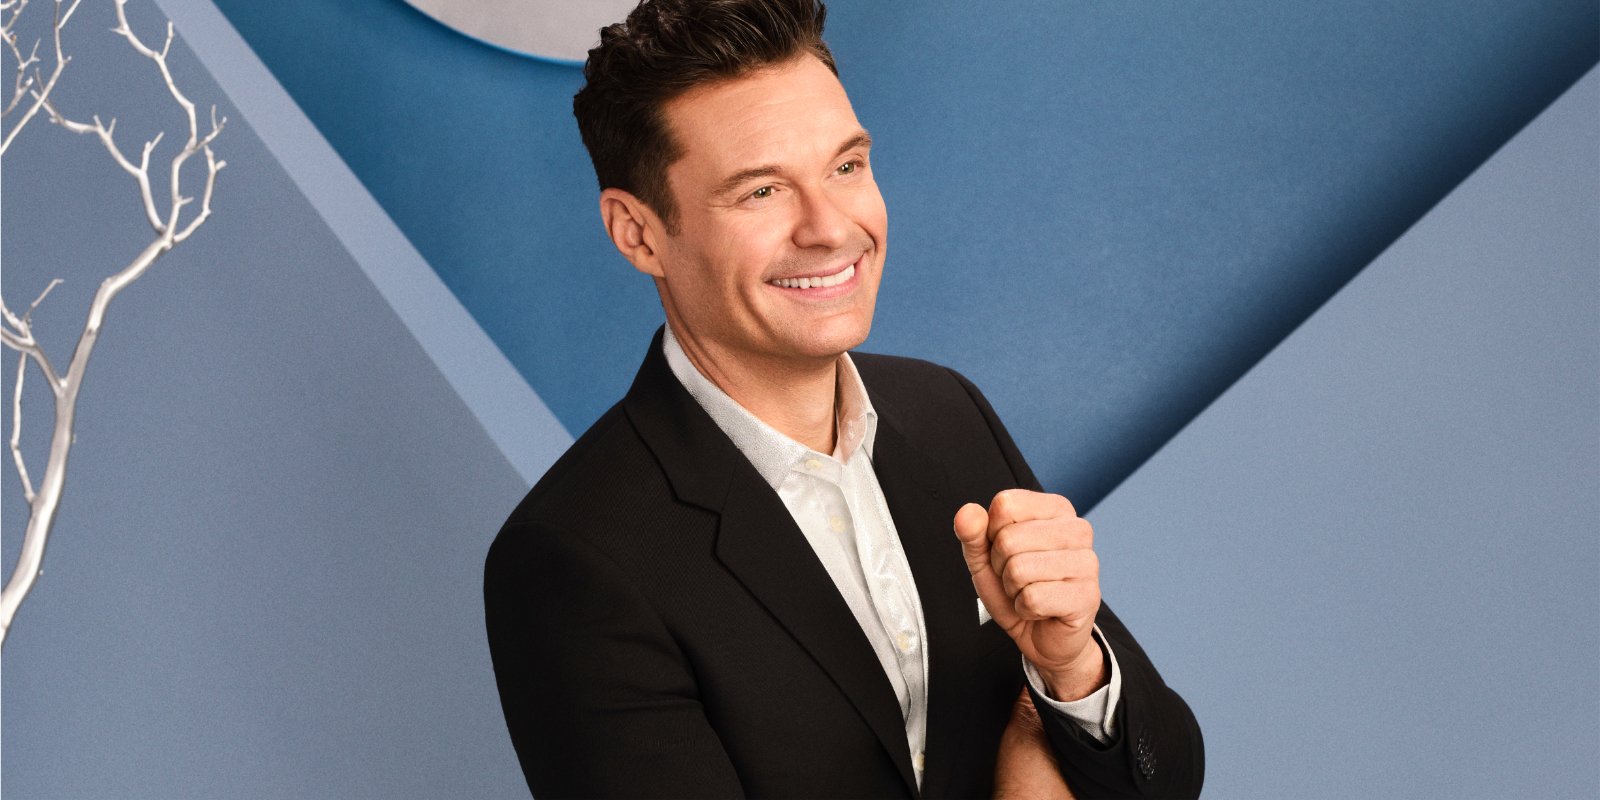 Ryan Seacrest in a new promo photo for the latest season of 'American Idol.'